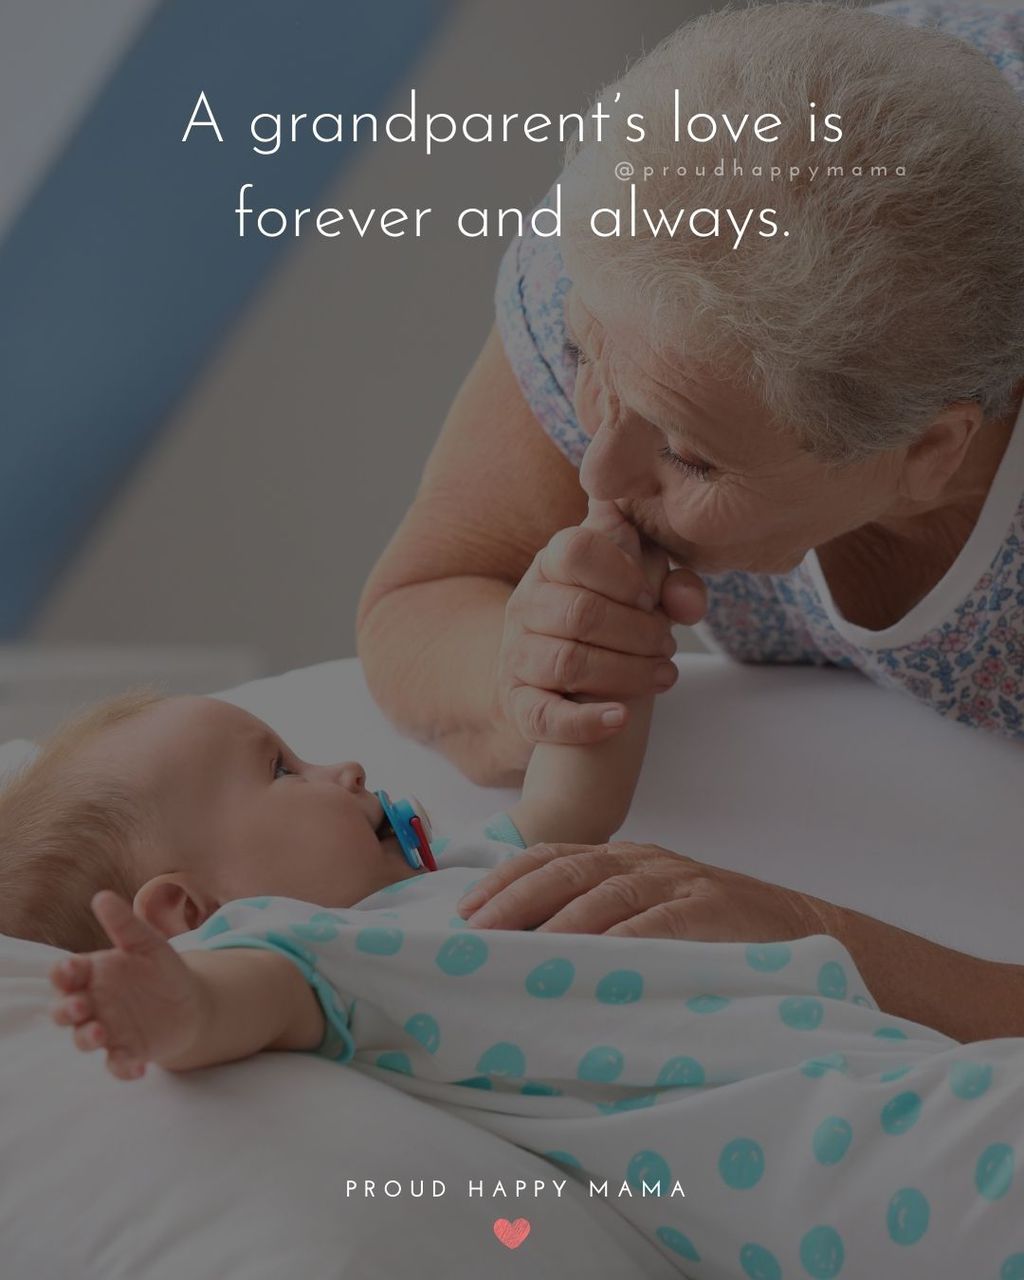 Quotes for Grandchildren - A grandparents love is forever and always.